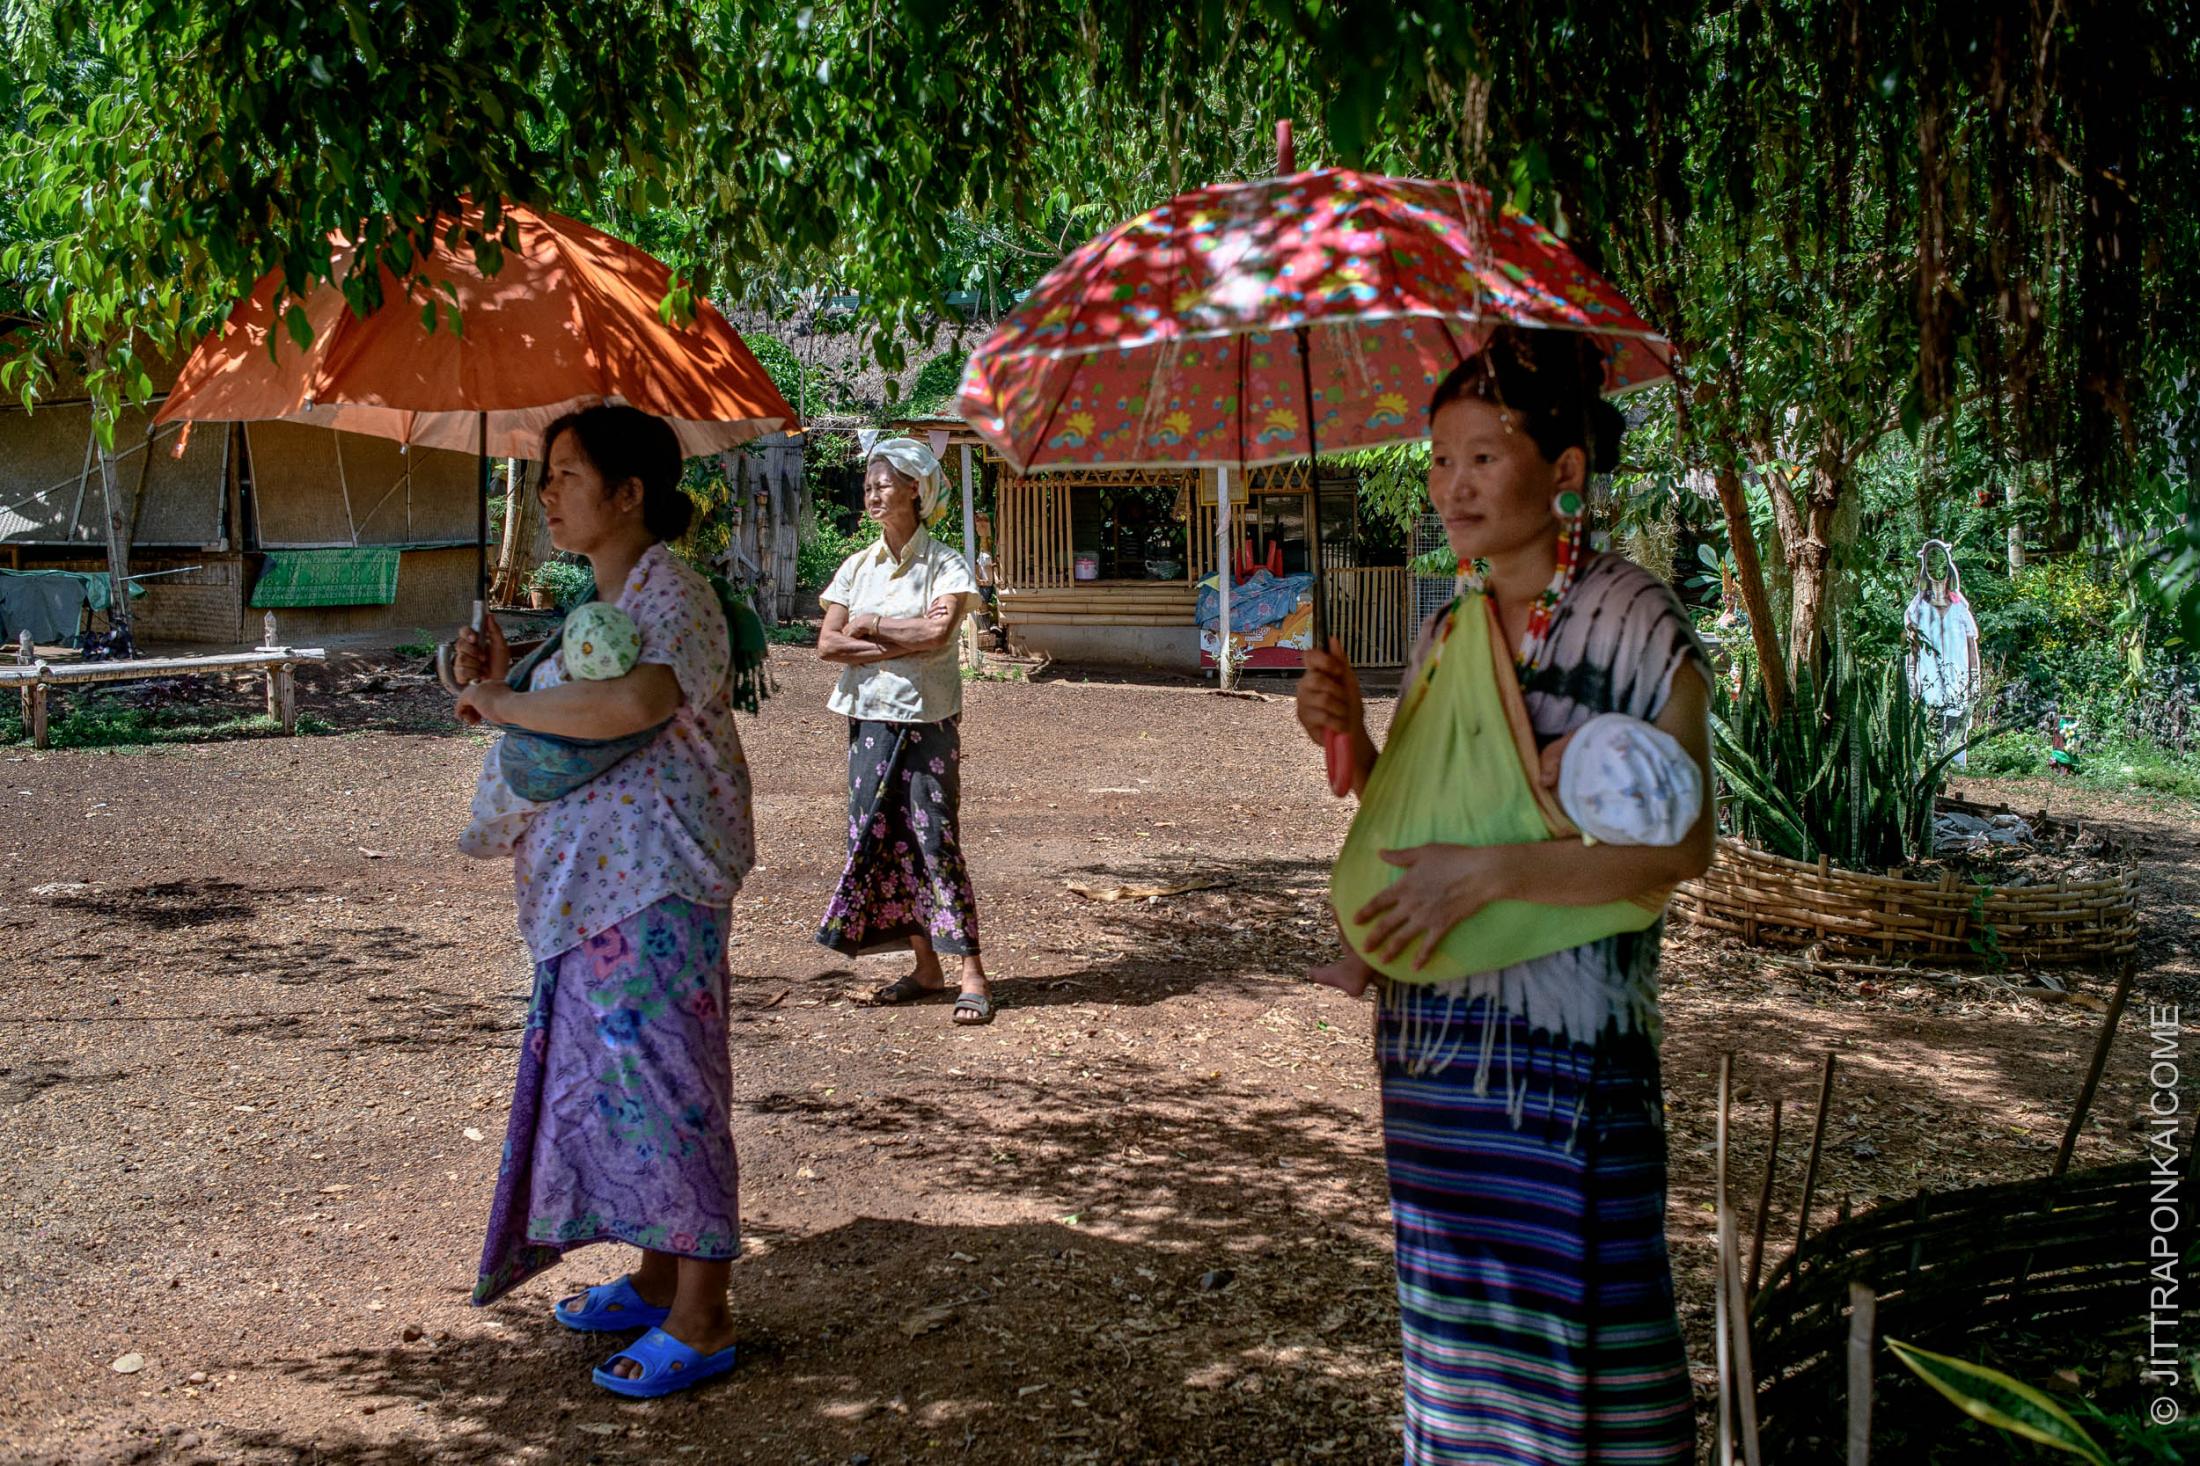 Kayaw, a tribal wearing big earrings and Kayan long neck women are waiting to received food handouts at a tourist hill tribe village in Mae Tang - Chiang Mai, Thailand.